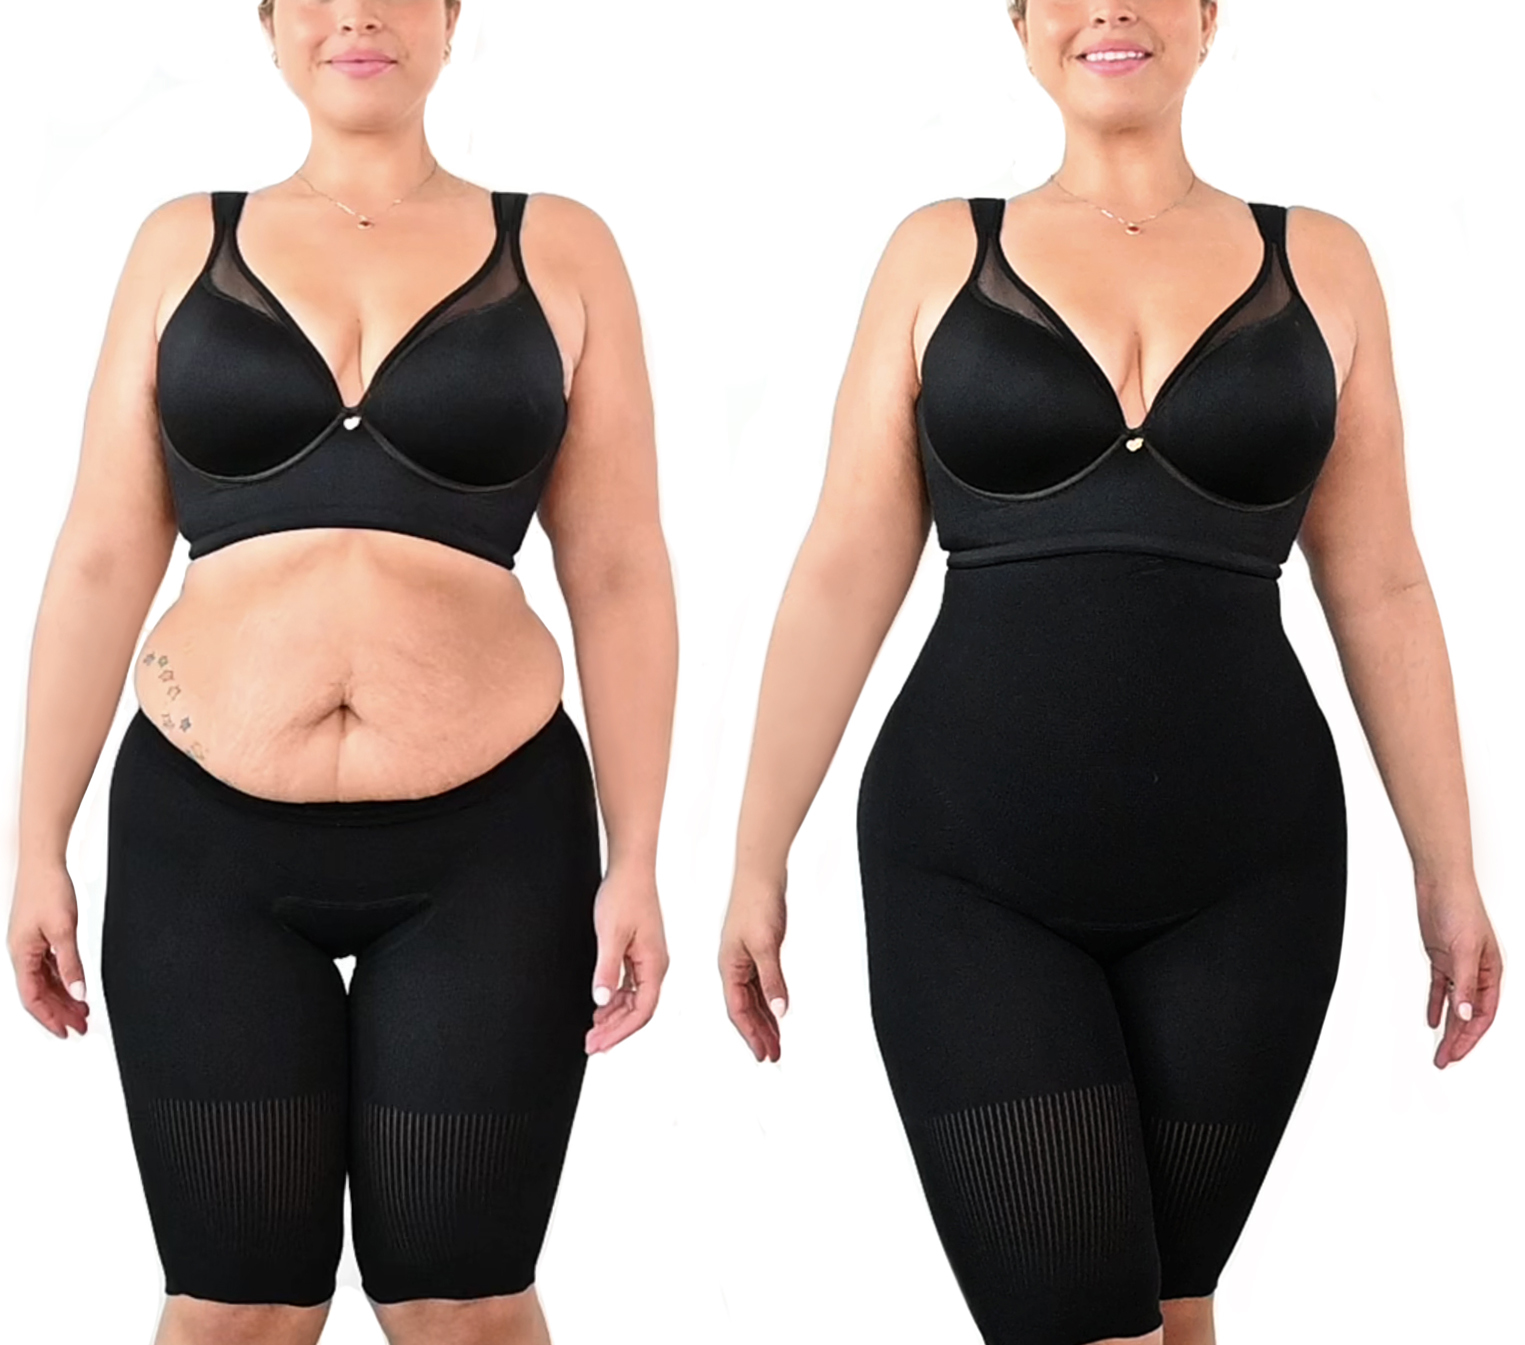 Shop Yahaira - 💕 Happy Butt No.7 body shaper Low Waist just arrived!  Specially designed to flatten lower abdomen & reshape buttocks seamlessly.  💕If you want to know your size please write